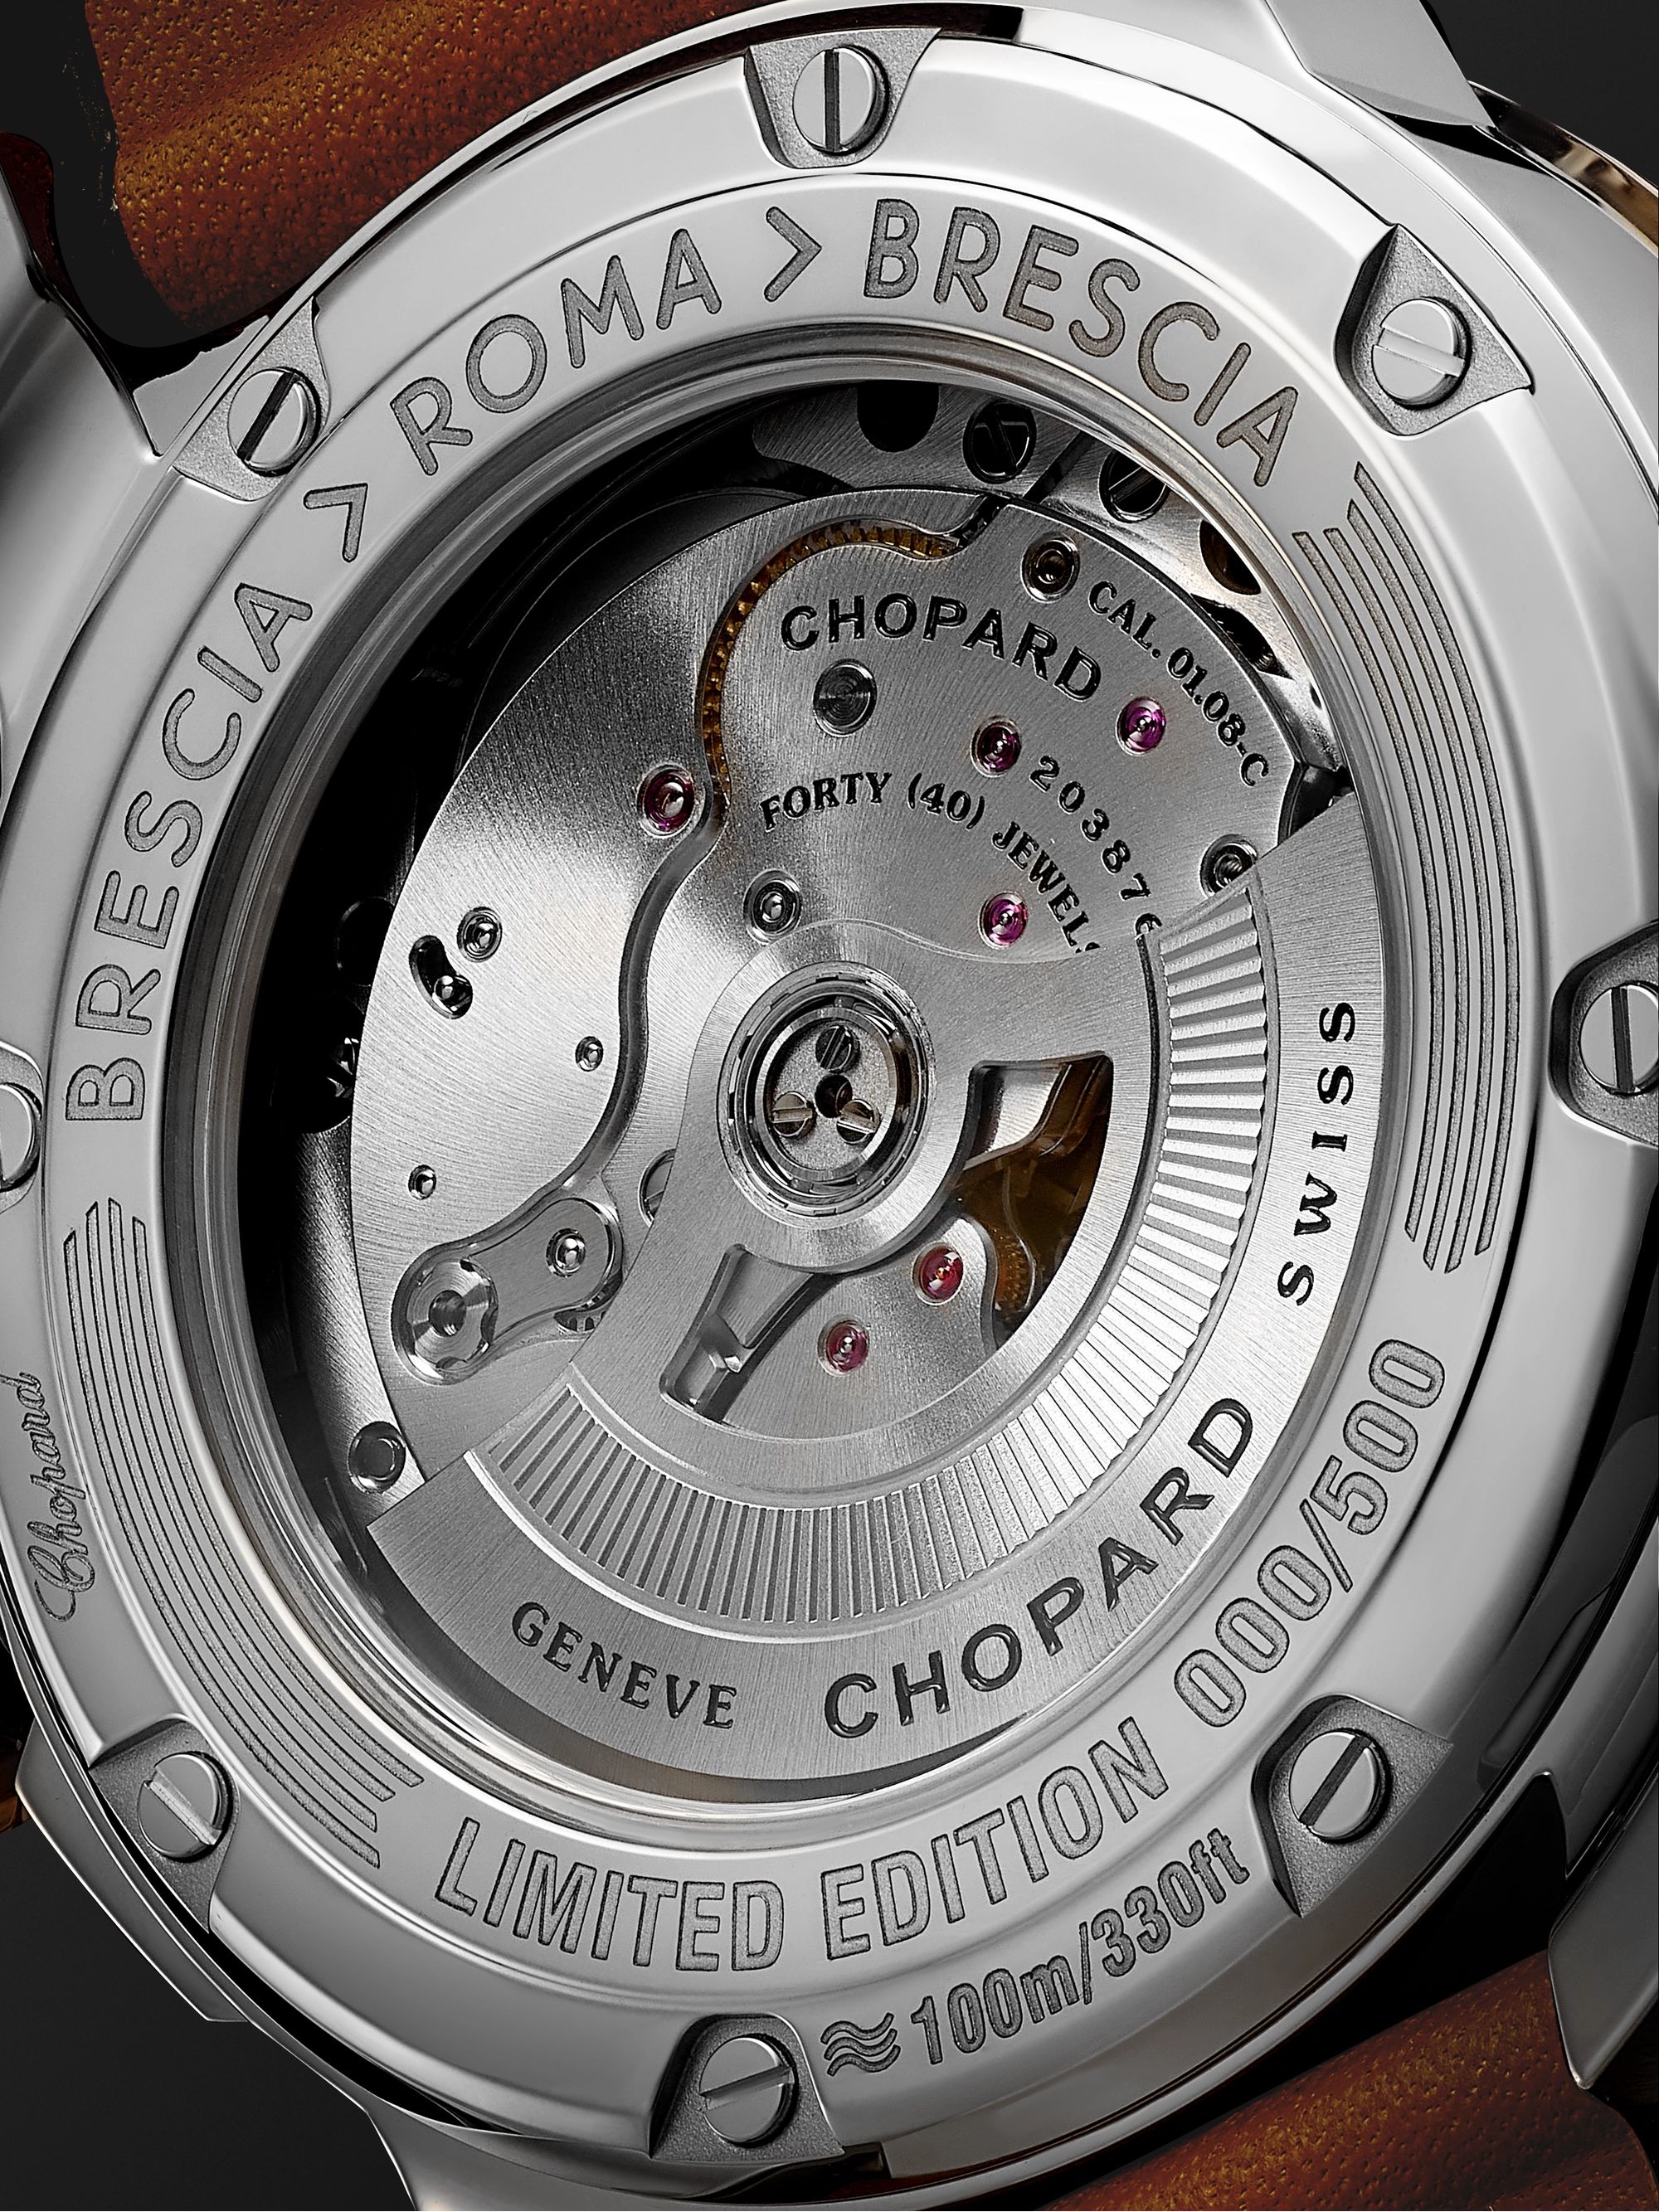 CHOPARD Mille Miglia GTS Power Control Limited Edition Automatic 43mm, 18-Karat Rose Gold, Stainless Steel and Leather Watch, Ref. No. 168566-6001